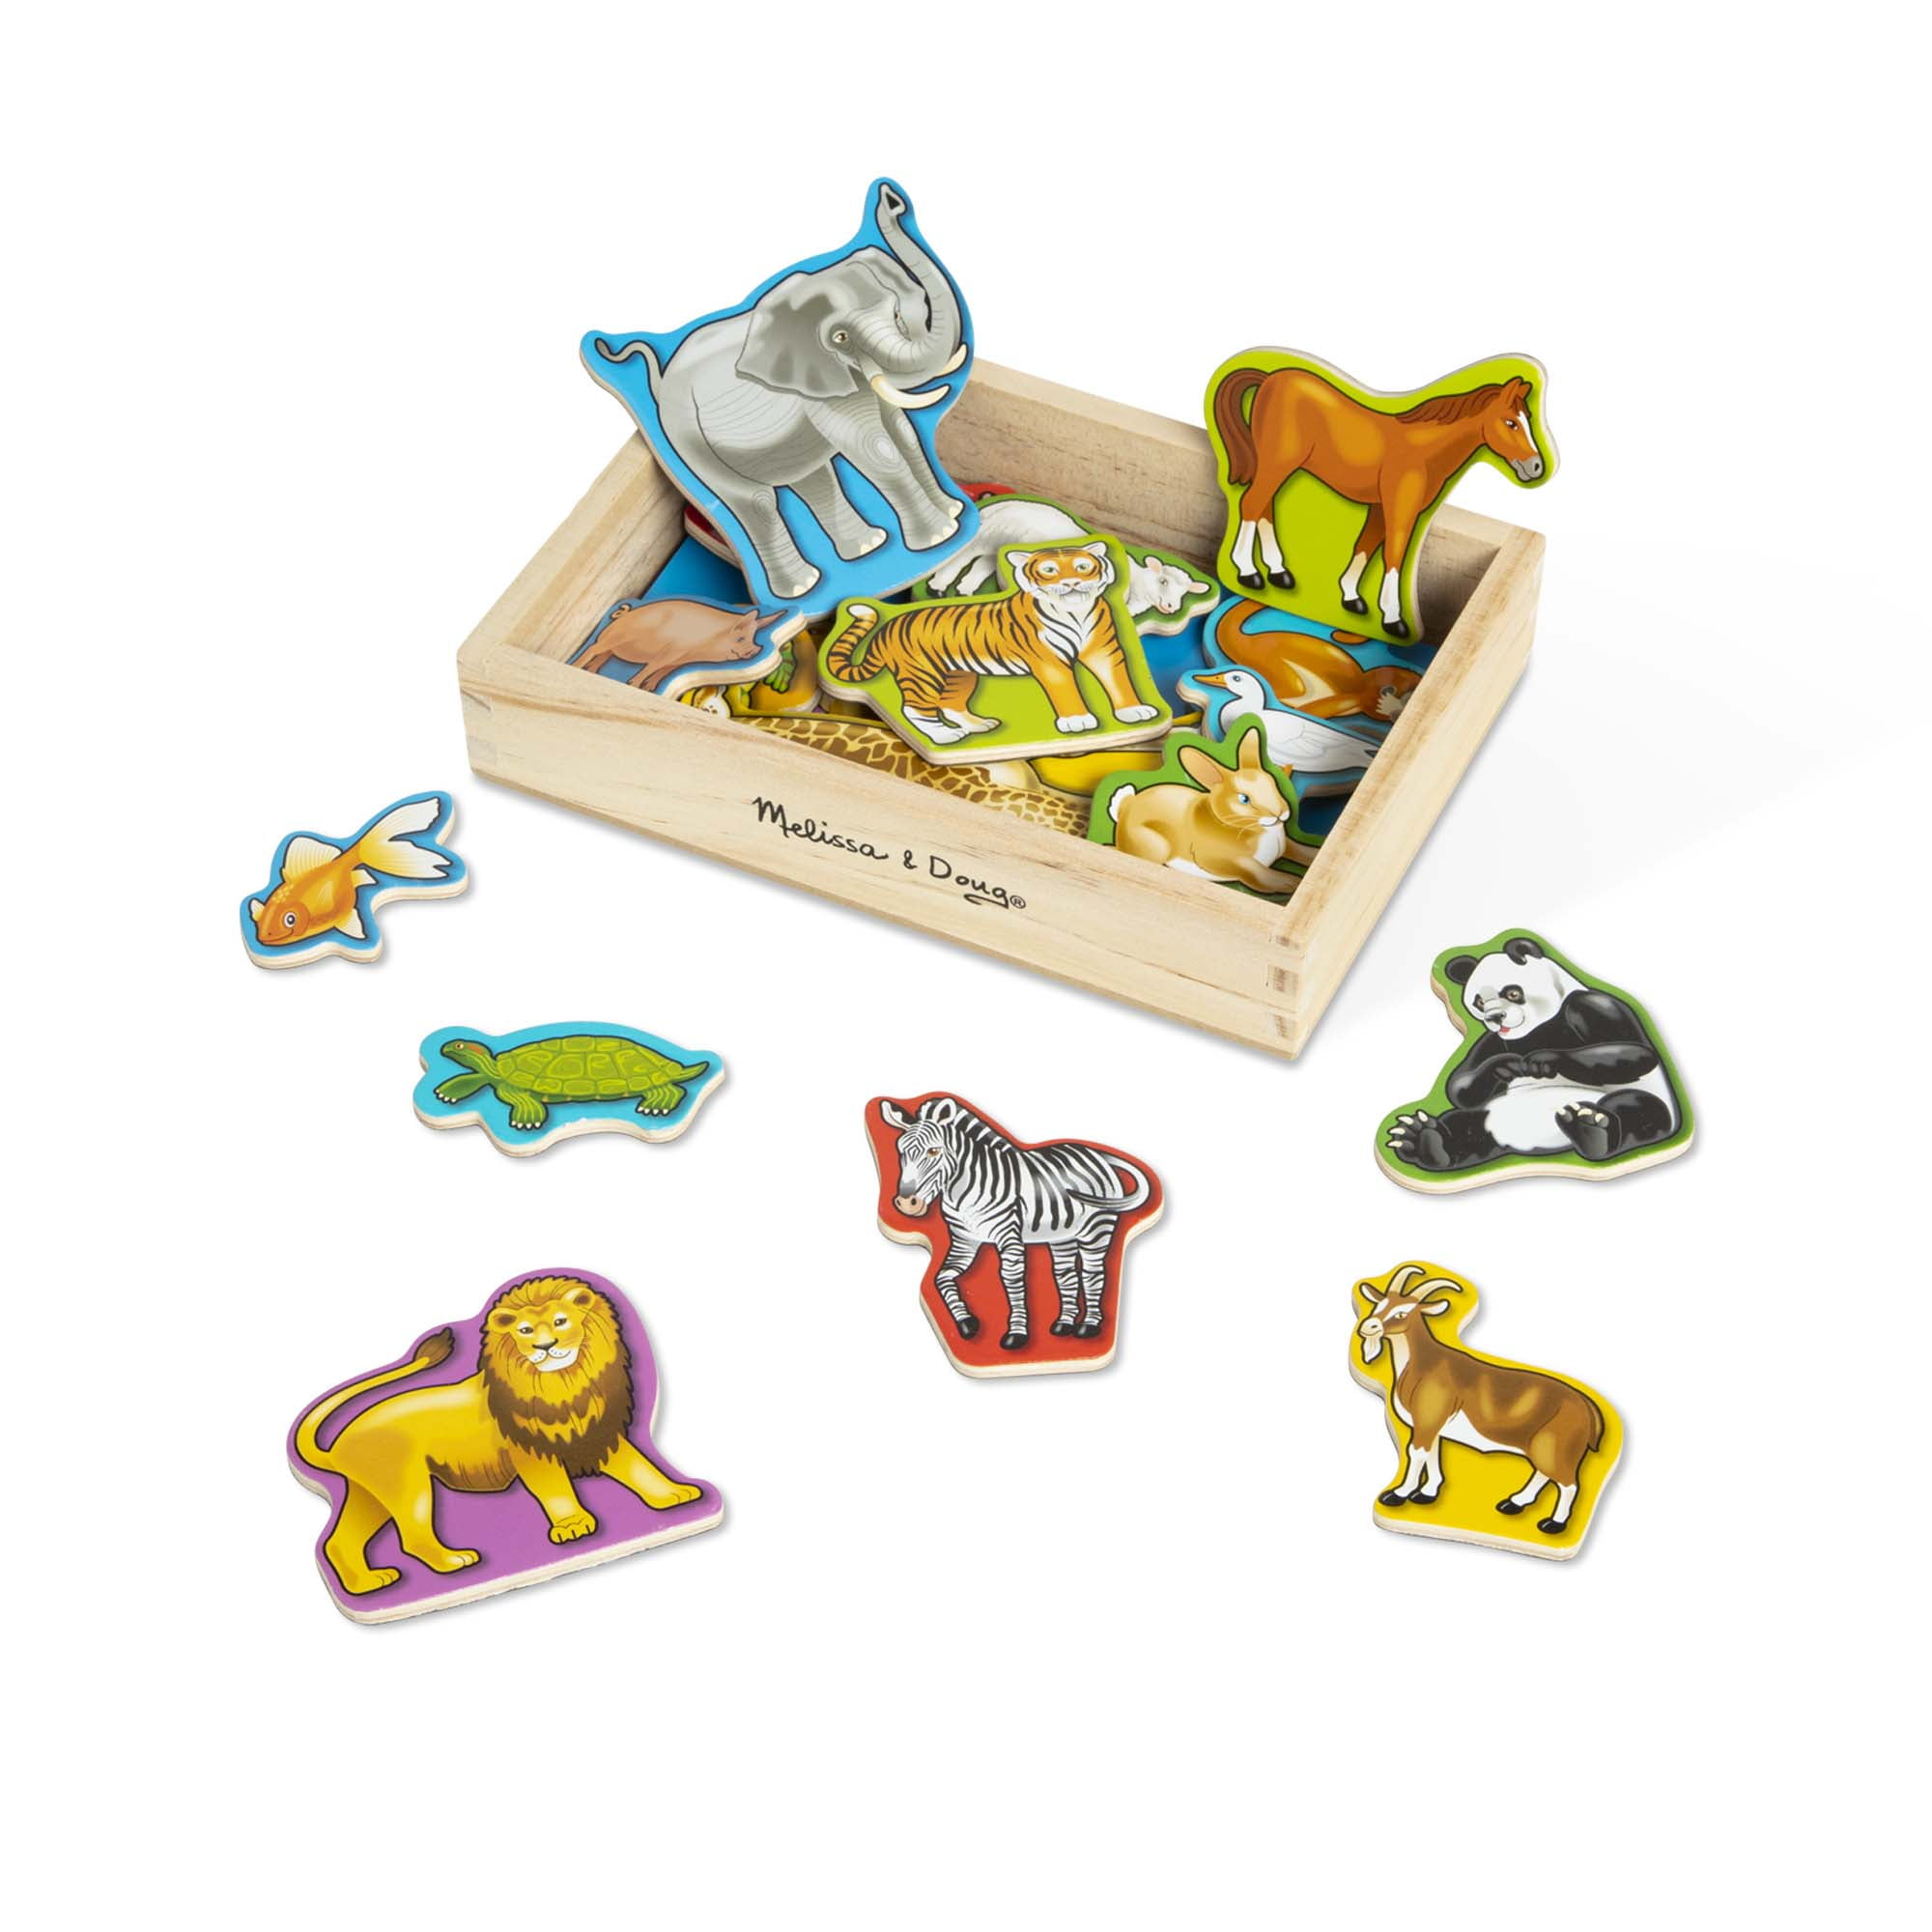 Melissa & Doug Magnetic Wooden Dinosaurs in a Box,Multicolor 